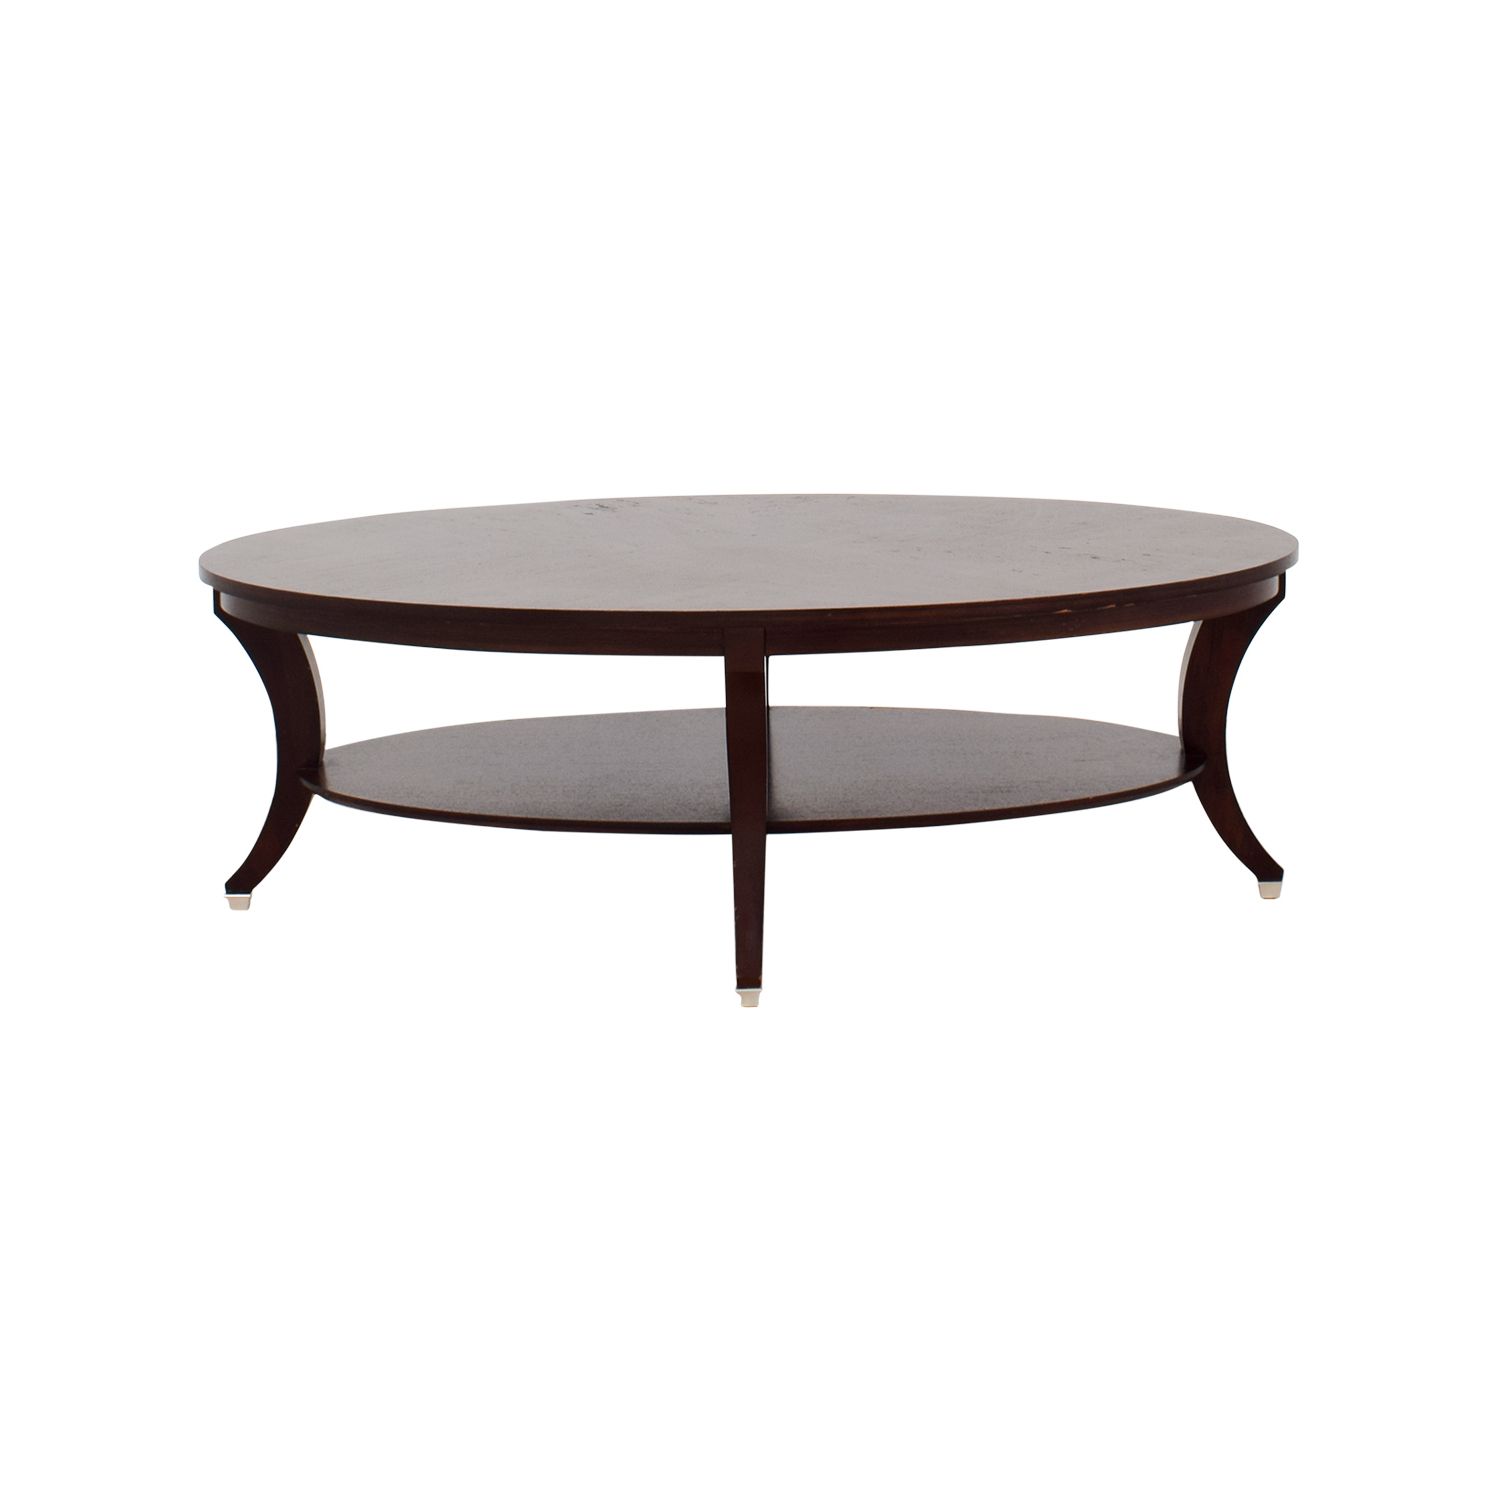 [%90% Off – Ethan Allen Ethan Allen Adler Oval Coffee Table / Tables In Famous Allen Cocktail Tables|allen Cocktail Tables Inside Latest 90% Off – Ethan Allen Ethan Allen Adler Oval Coffee Table / Tables|well Liked Allen Cocktail Tables Intended For 90% Off – Ethan Allen Ethan Allen Adler Oval Coffee Table / Tables|newest 90% Off – Ethan Allen Ethan Allen Adler Oval Coffee Table / Tables Regarding Allen Cocktail Tables%] (View 11 of 20)